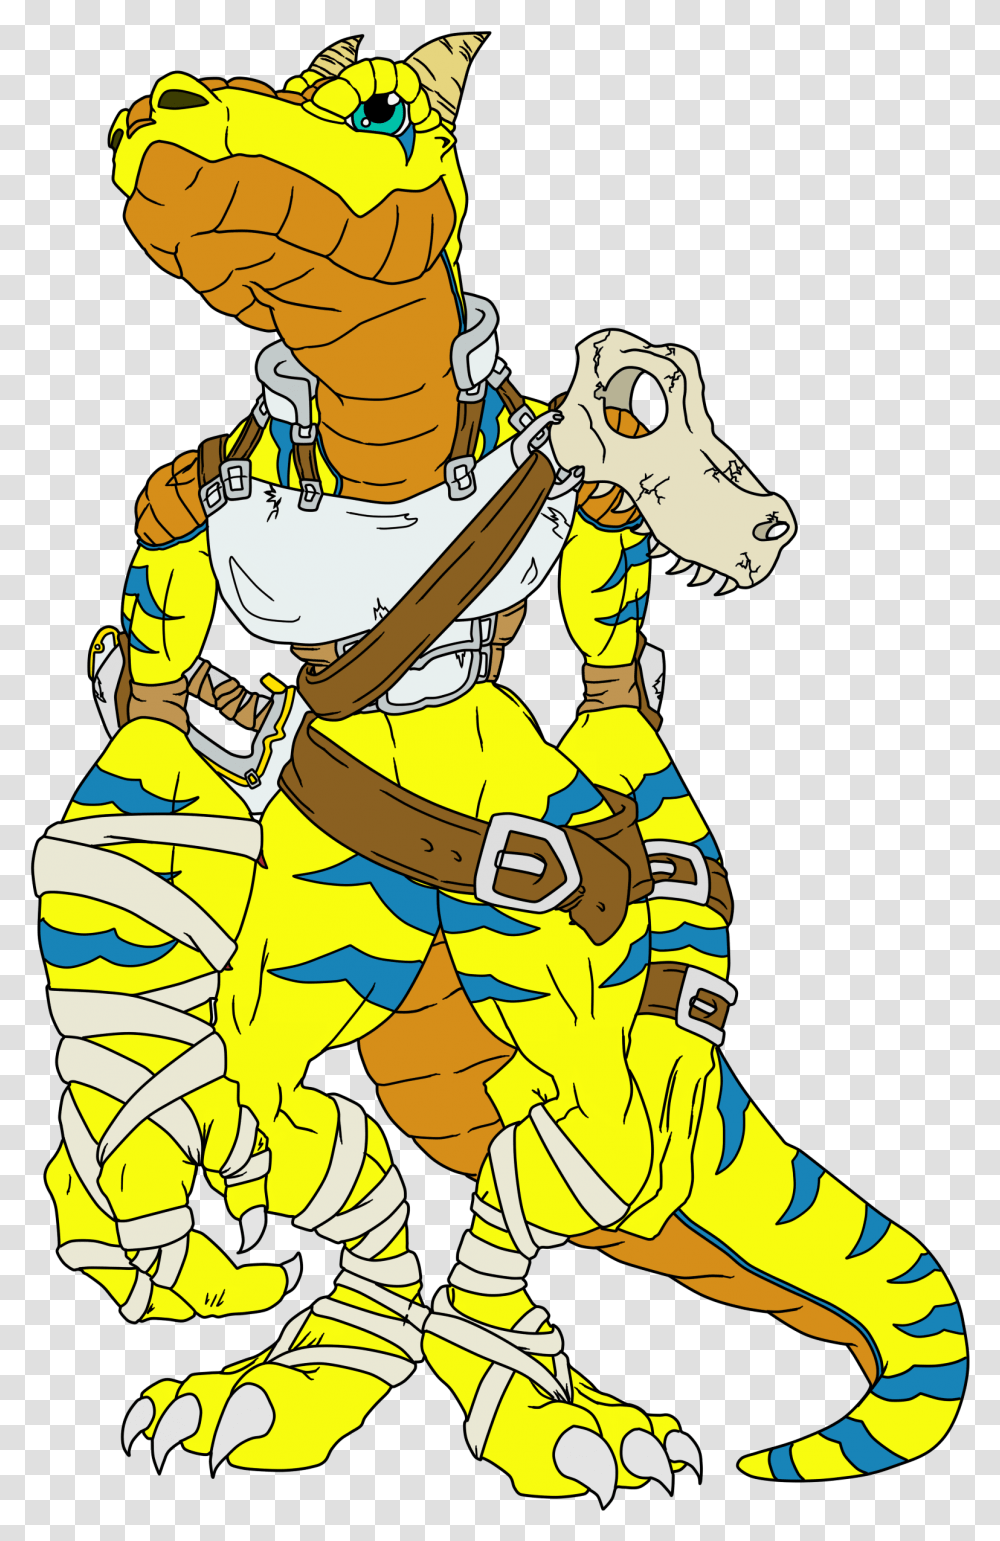 New Art Kendumon An Agumon Variant By Coreifygames On, Clothing, Person, Costume, Footwear Transparent Png